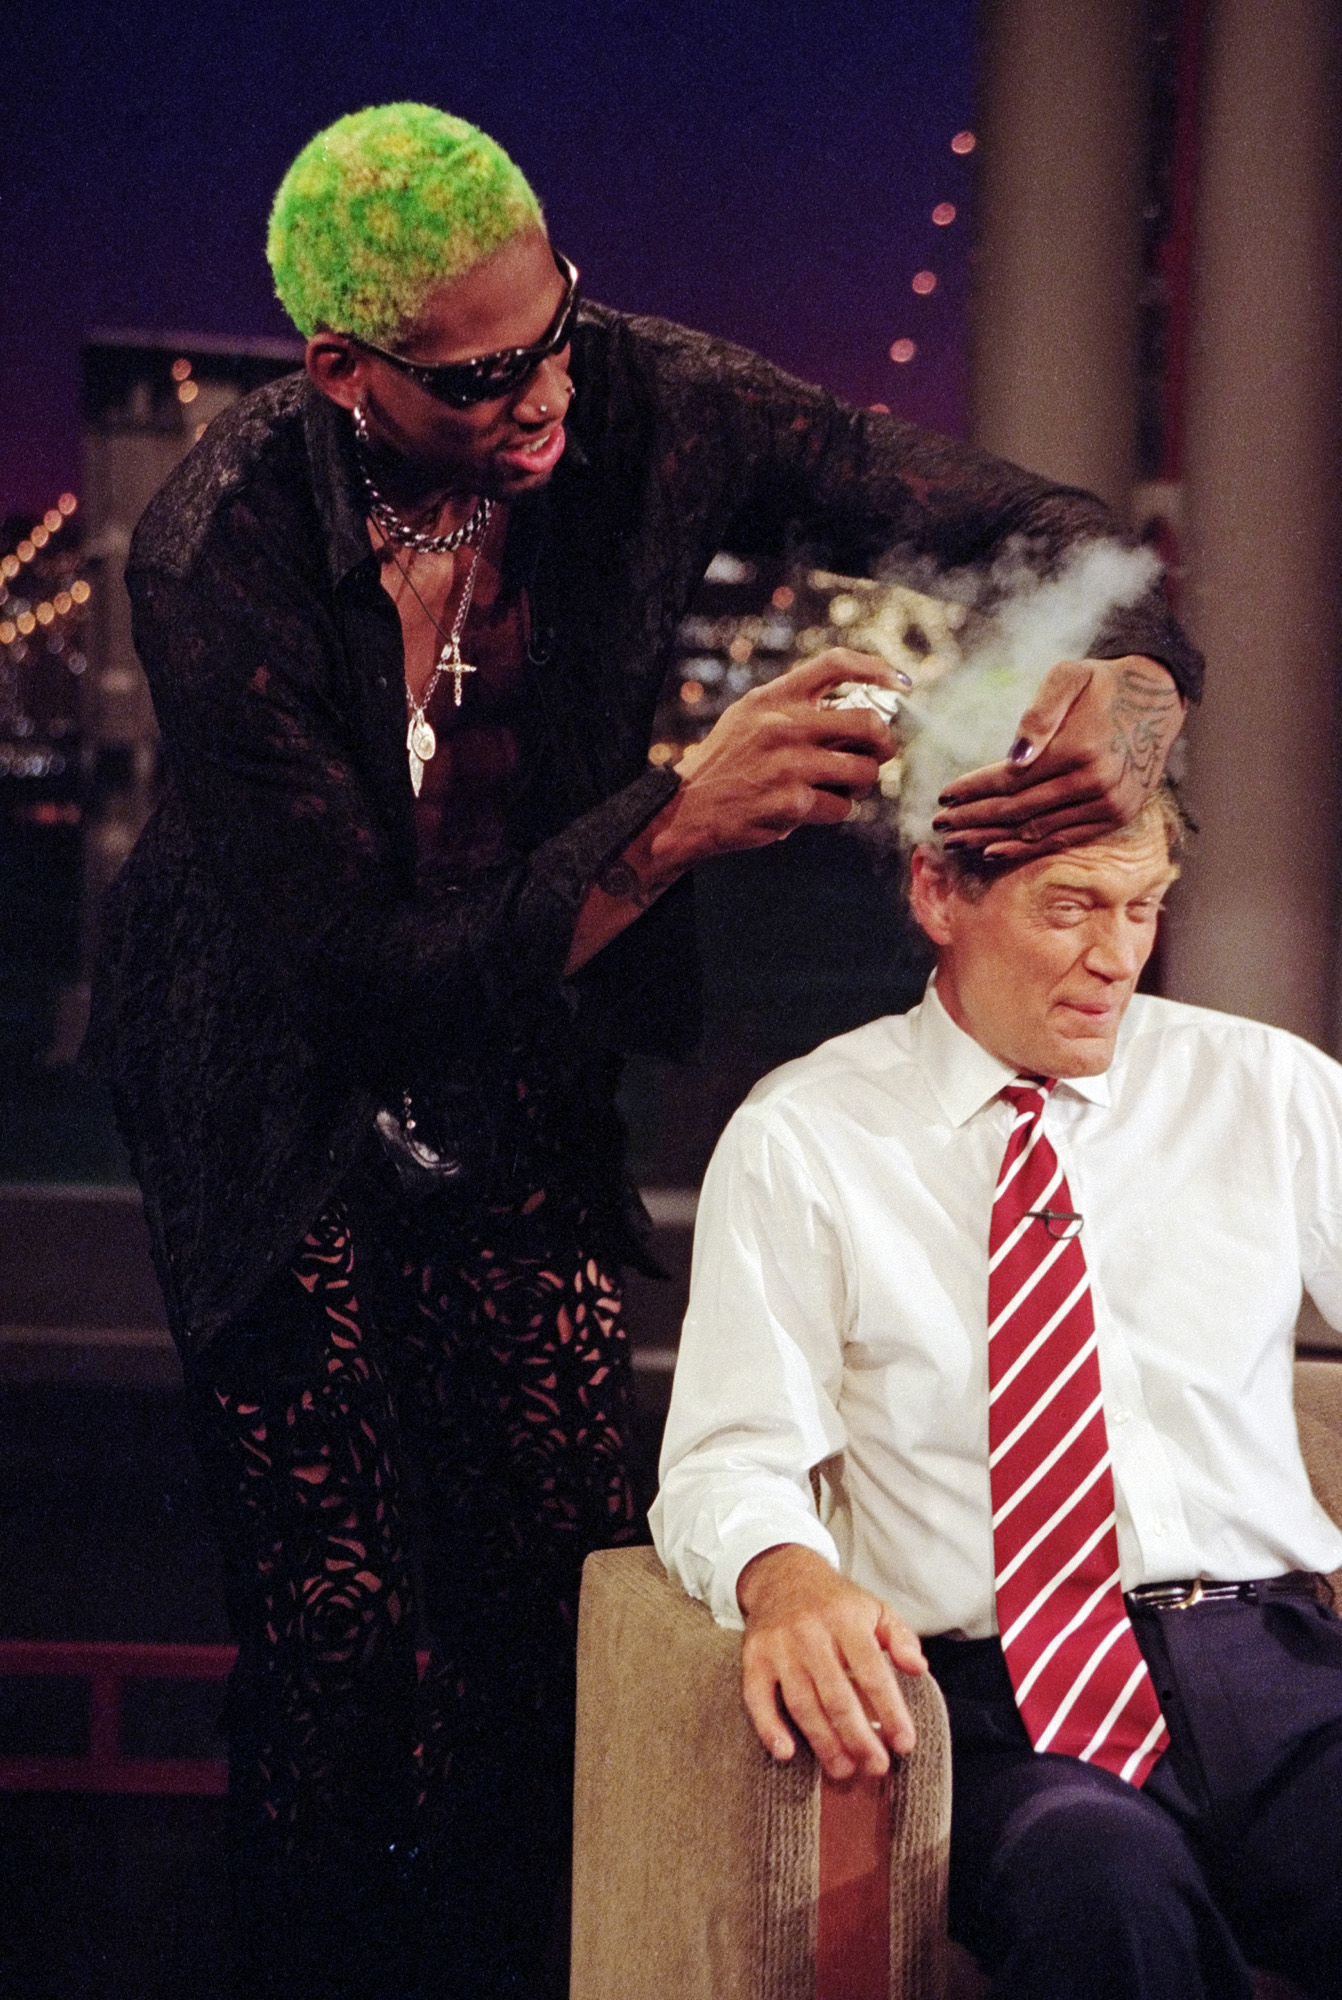 NBA star Dennis Rodman was the 90s most unexpected style icon